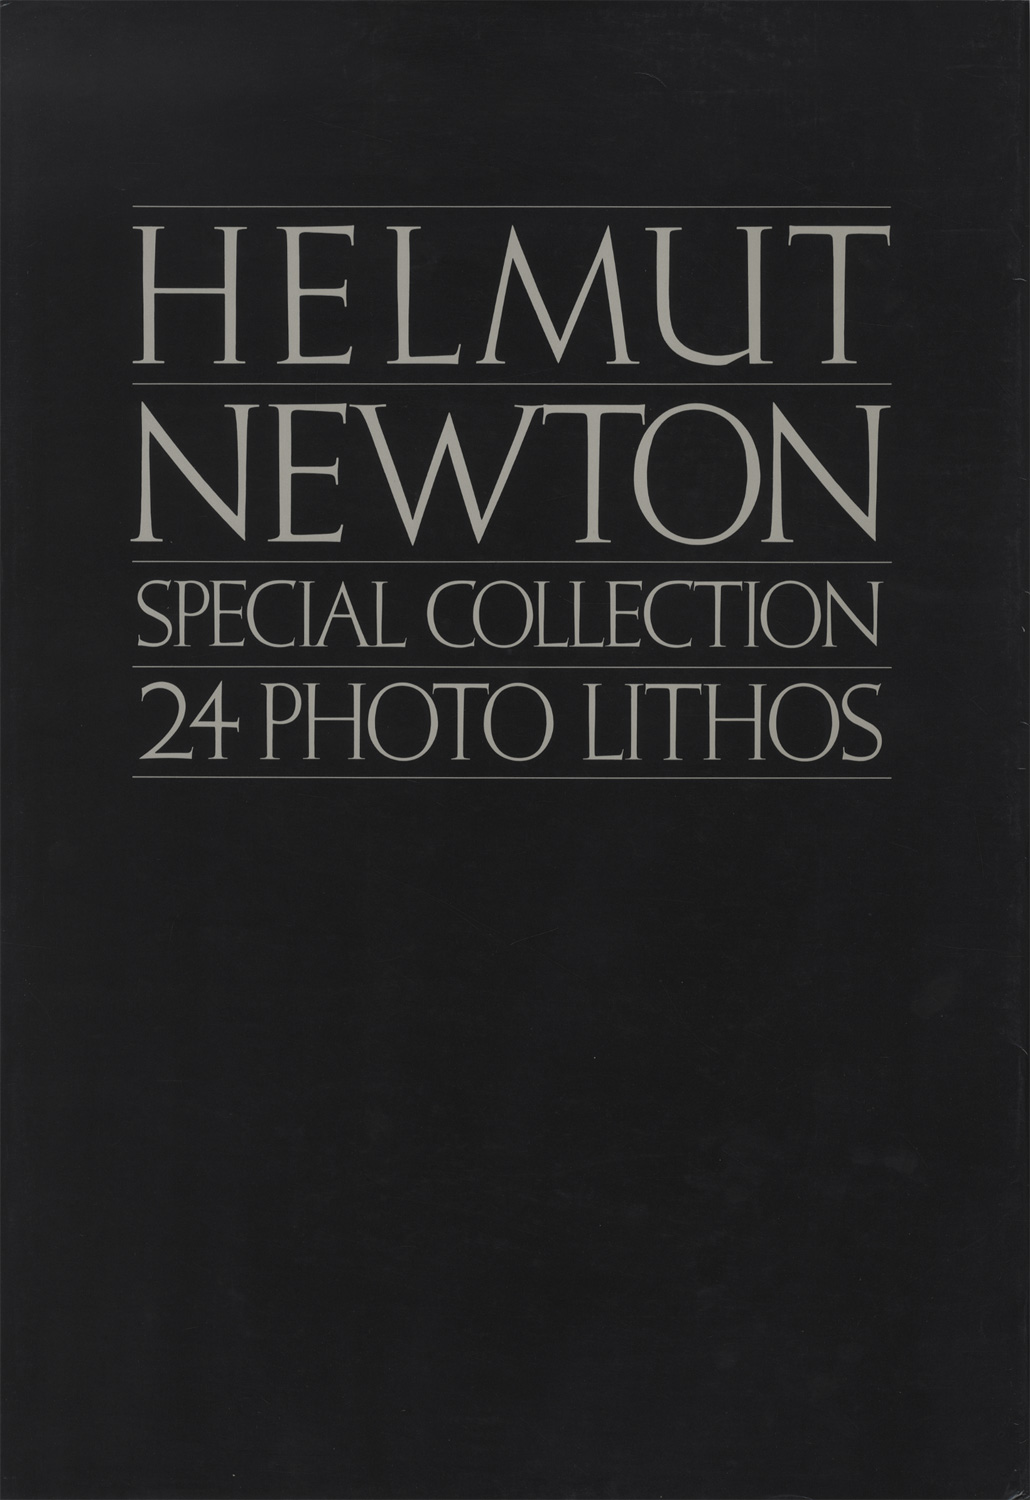 Helmut Newton: Special Collection 24 Photo Lithos